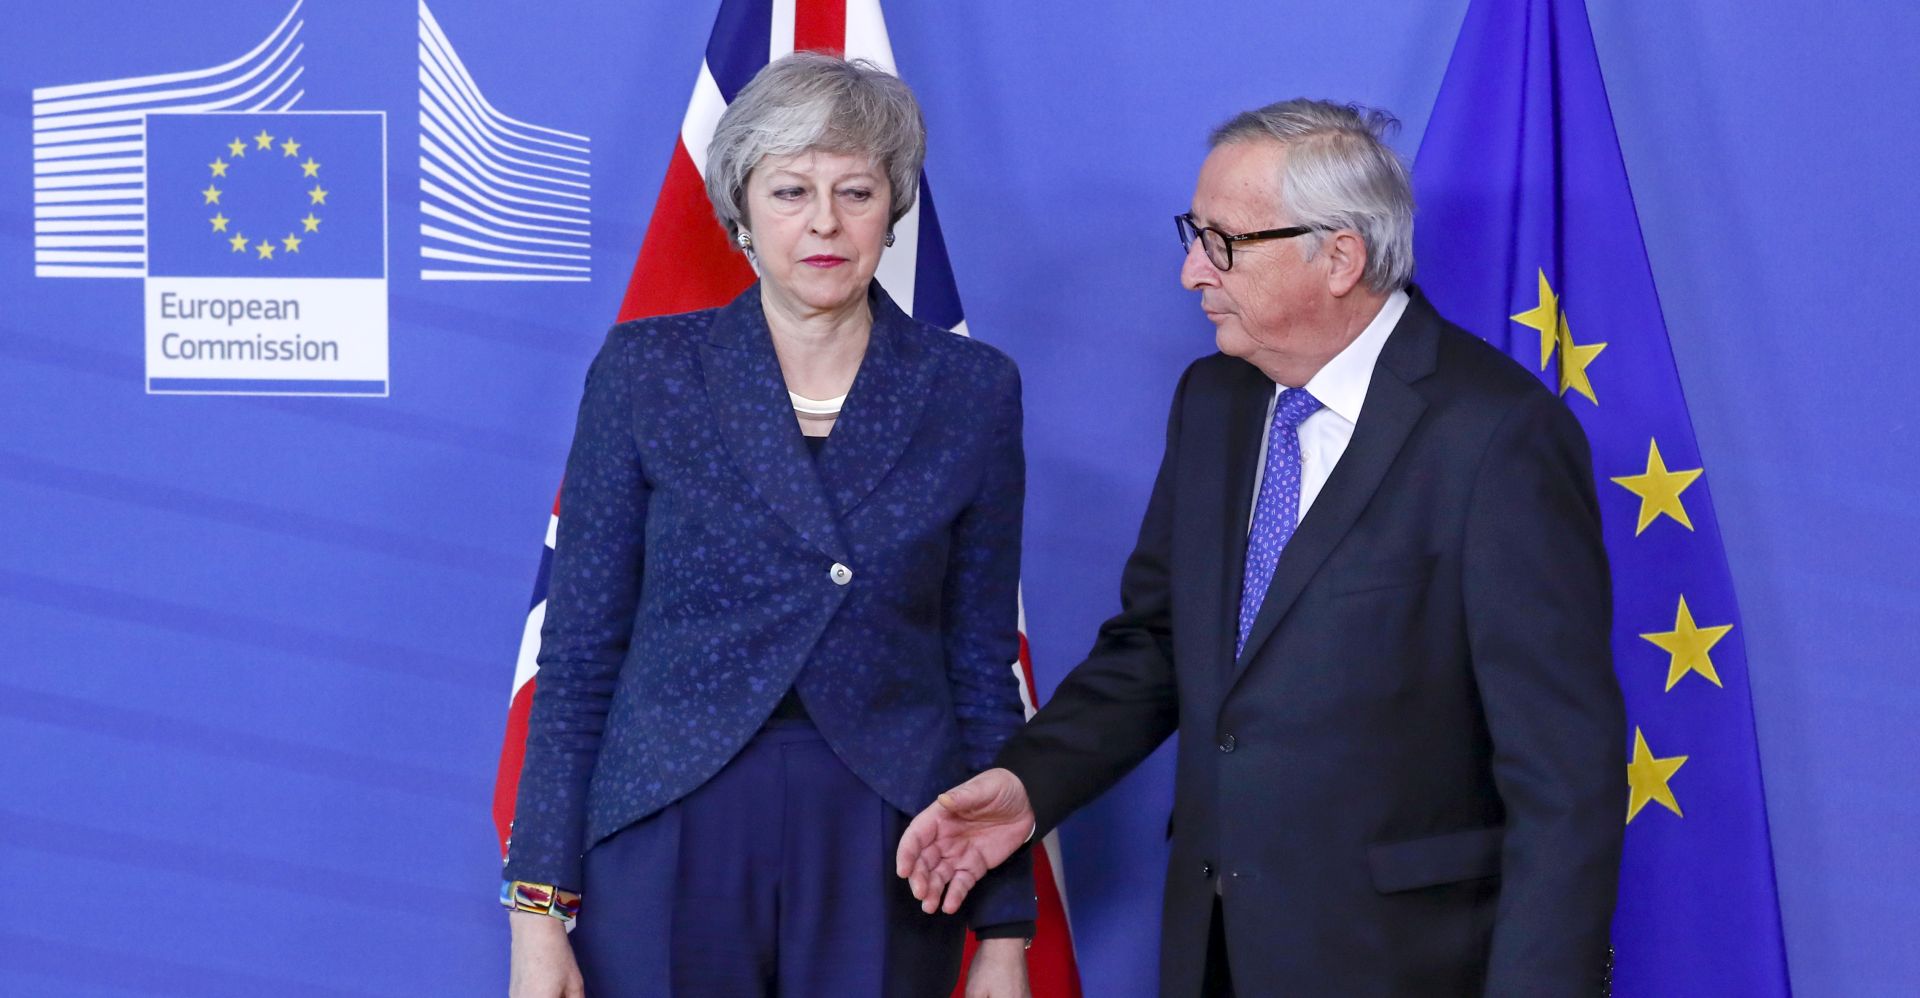 epa07349551 British Prime Minister Theresa May (L) is welcomed by European commission President Jean-Claude Juncker (R) ahead to a meeting on Brexit in Brussels, Belgium, 07 February 2019. May is in Brussels to discuss Brexit and related issues.  EPA/OLIVIER HOSLET